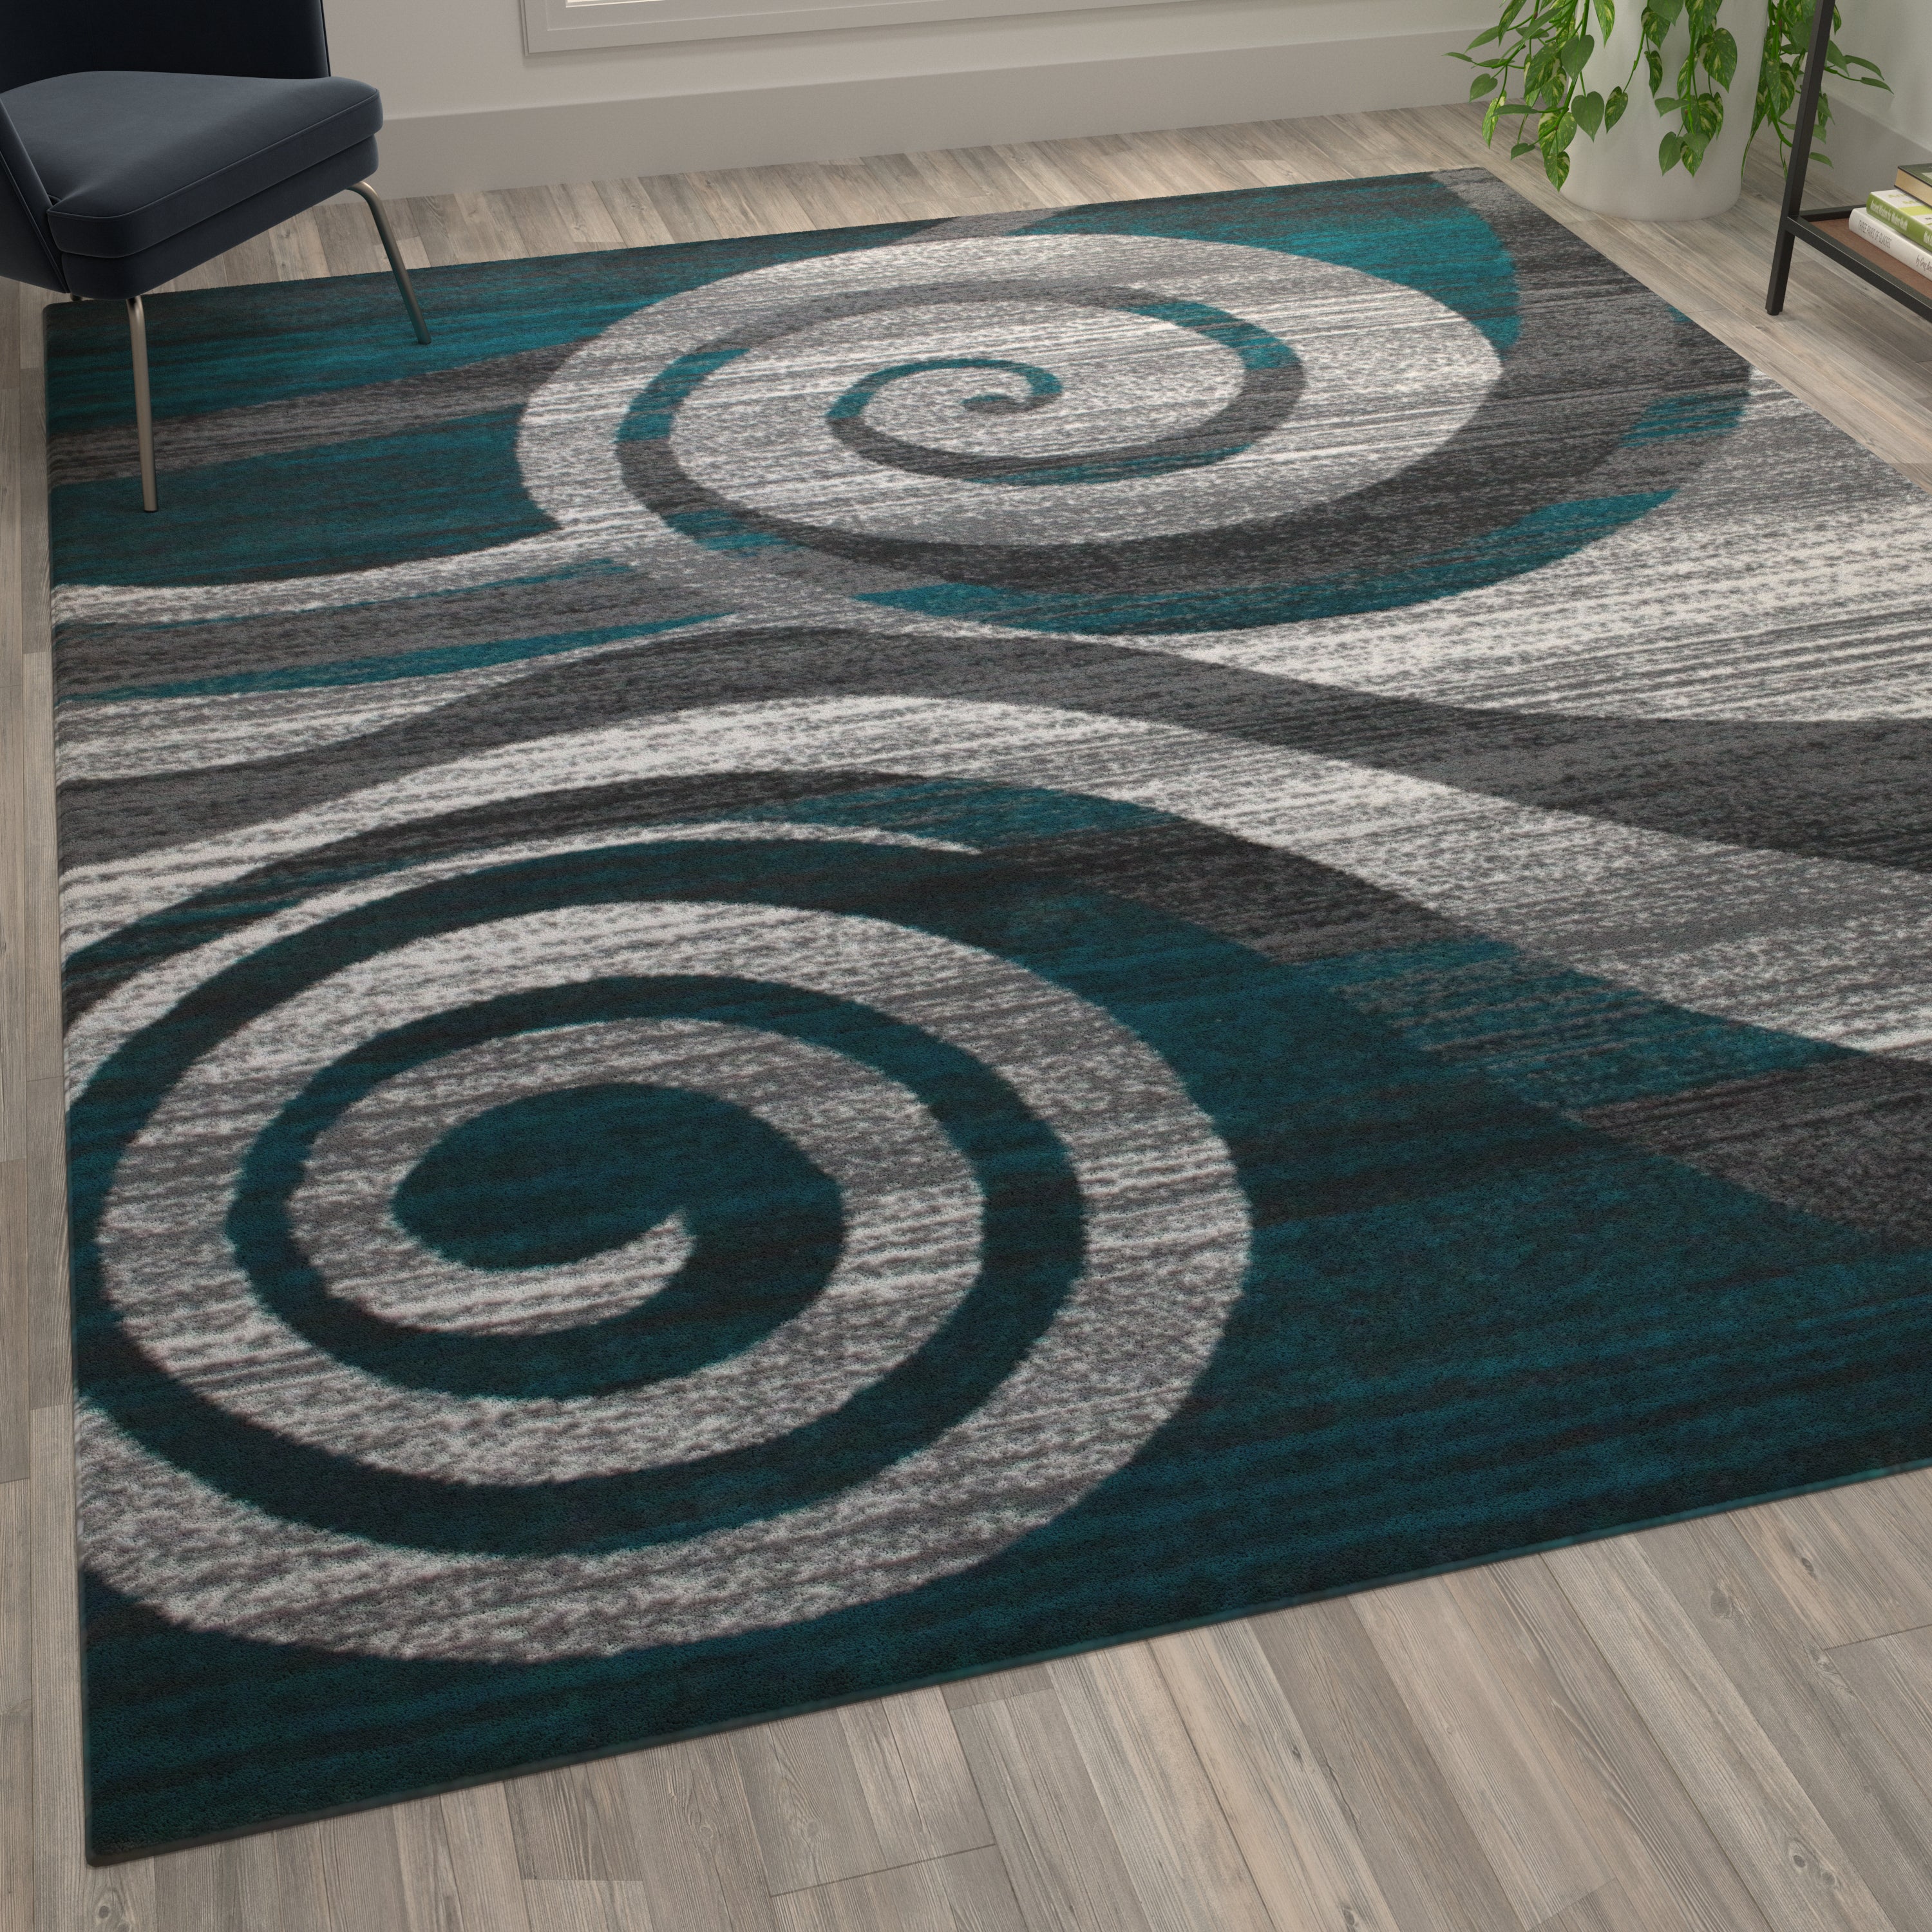 Cirrus Collection Swirl Patterned Olefin Area Rug with Jute Backing for Entryway, Living Room, Bedroom-Indoor Area Rug-Flash Furniture-Wall2Wall Furnishings